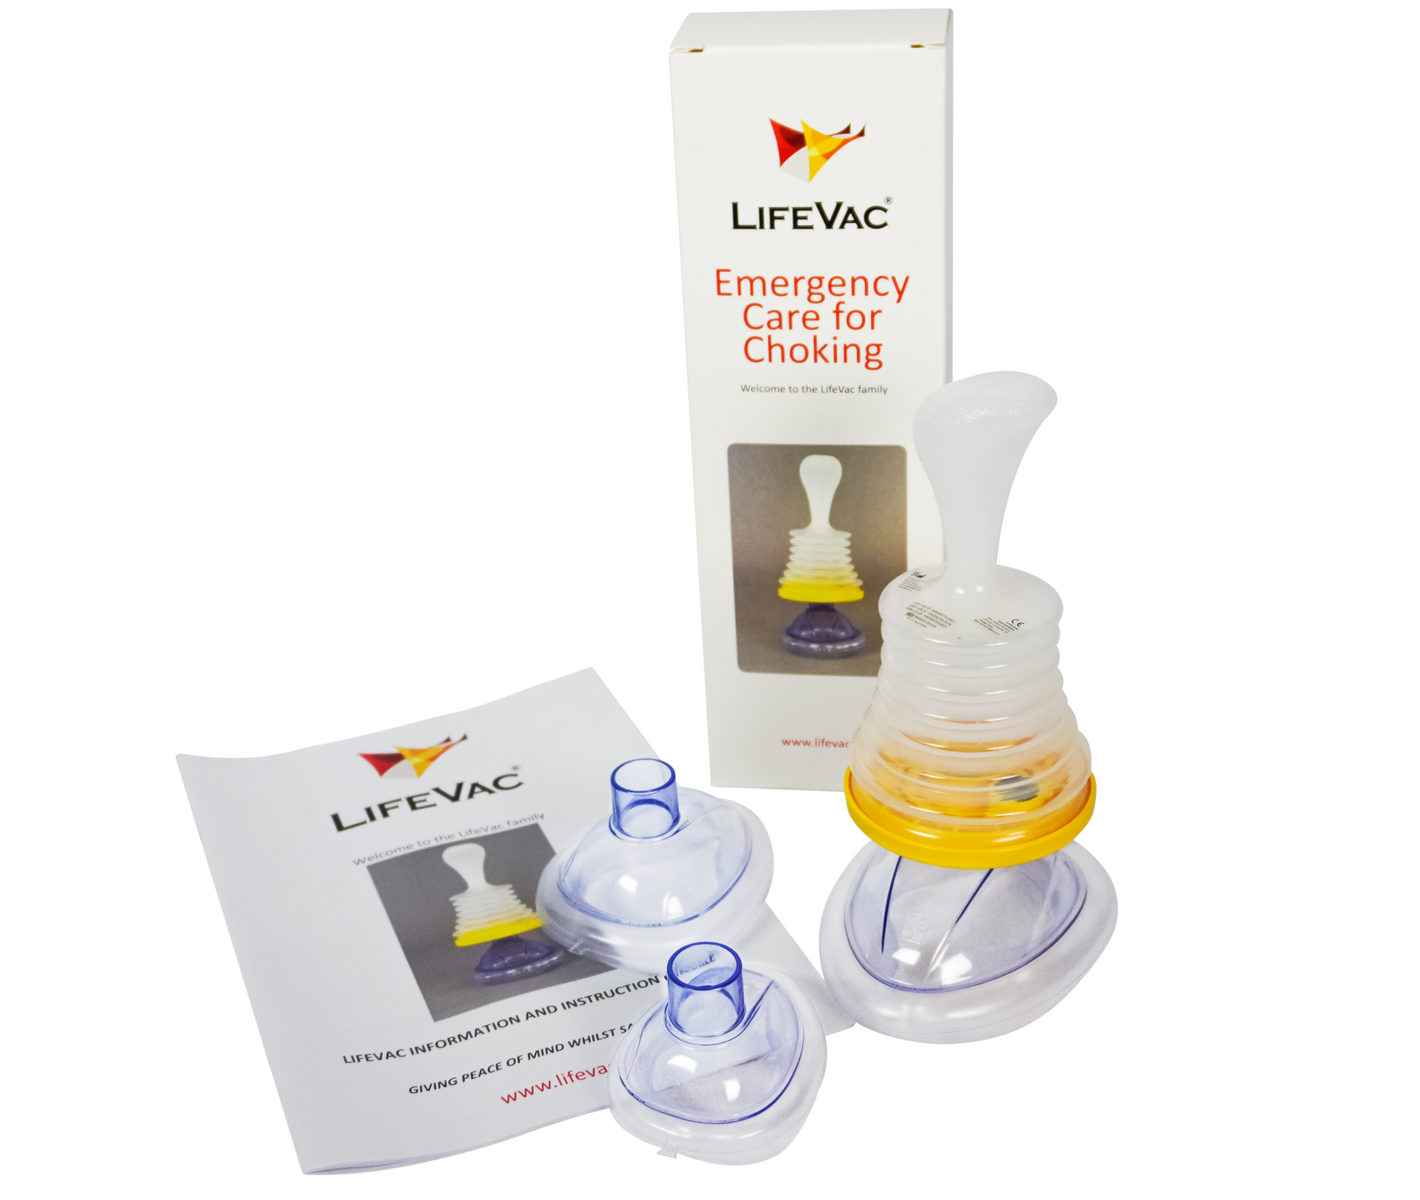 LifeVac Europe Limited - Care Management Matters